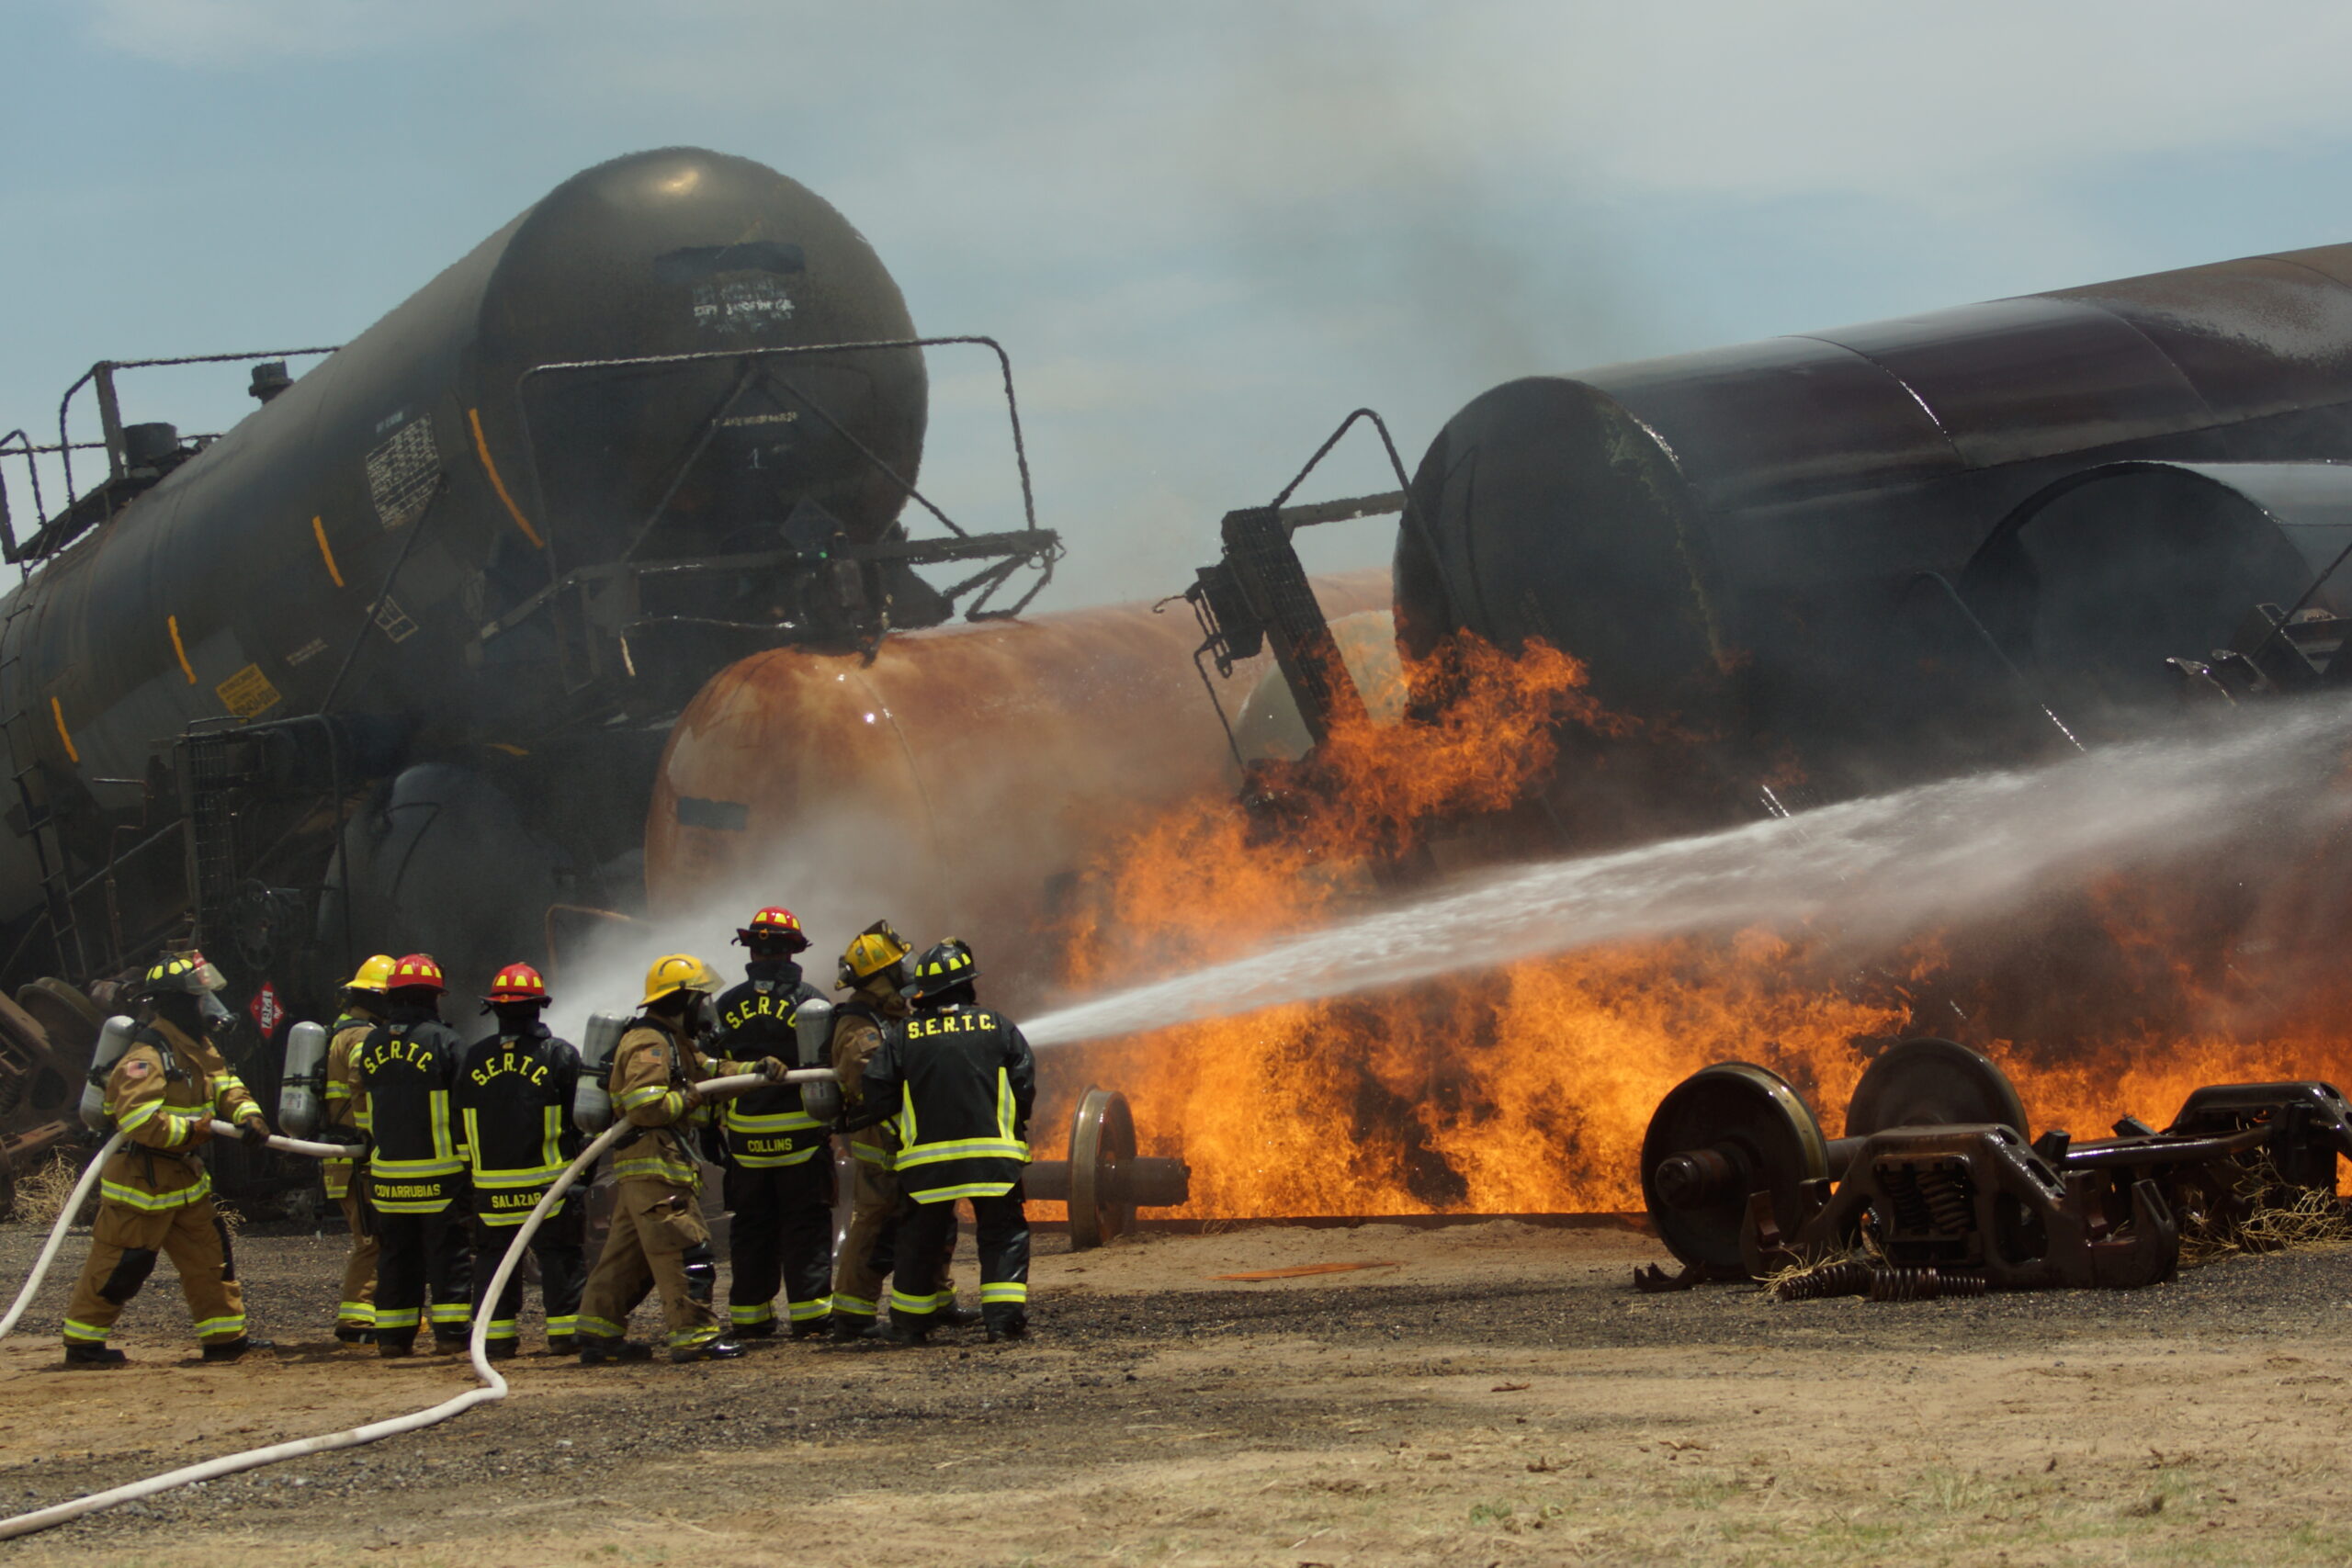 Firefighters training on a full-scale simulated derailment with live fire.